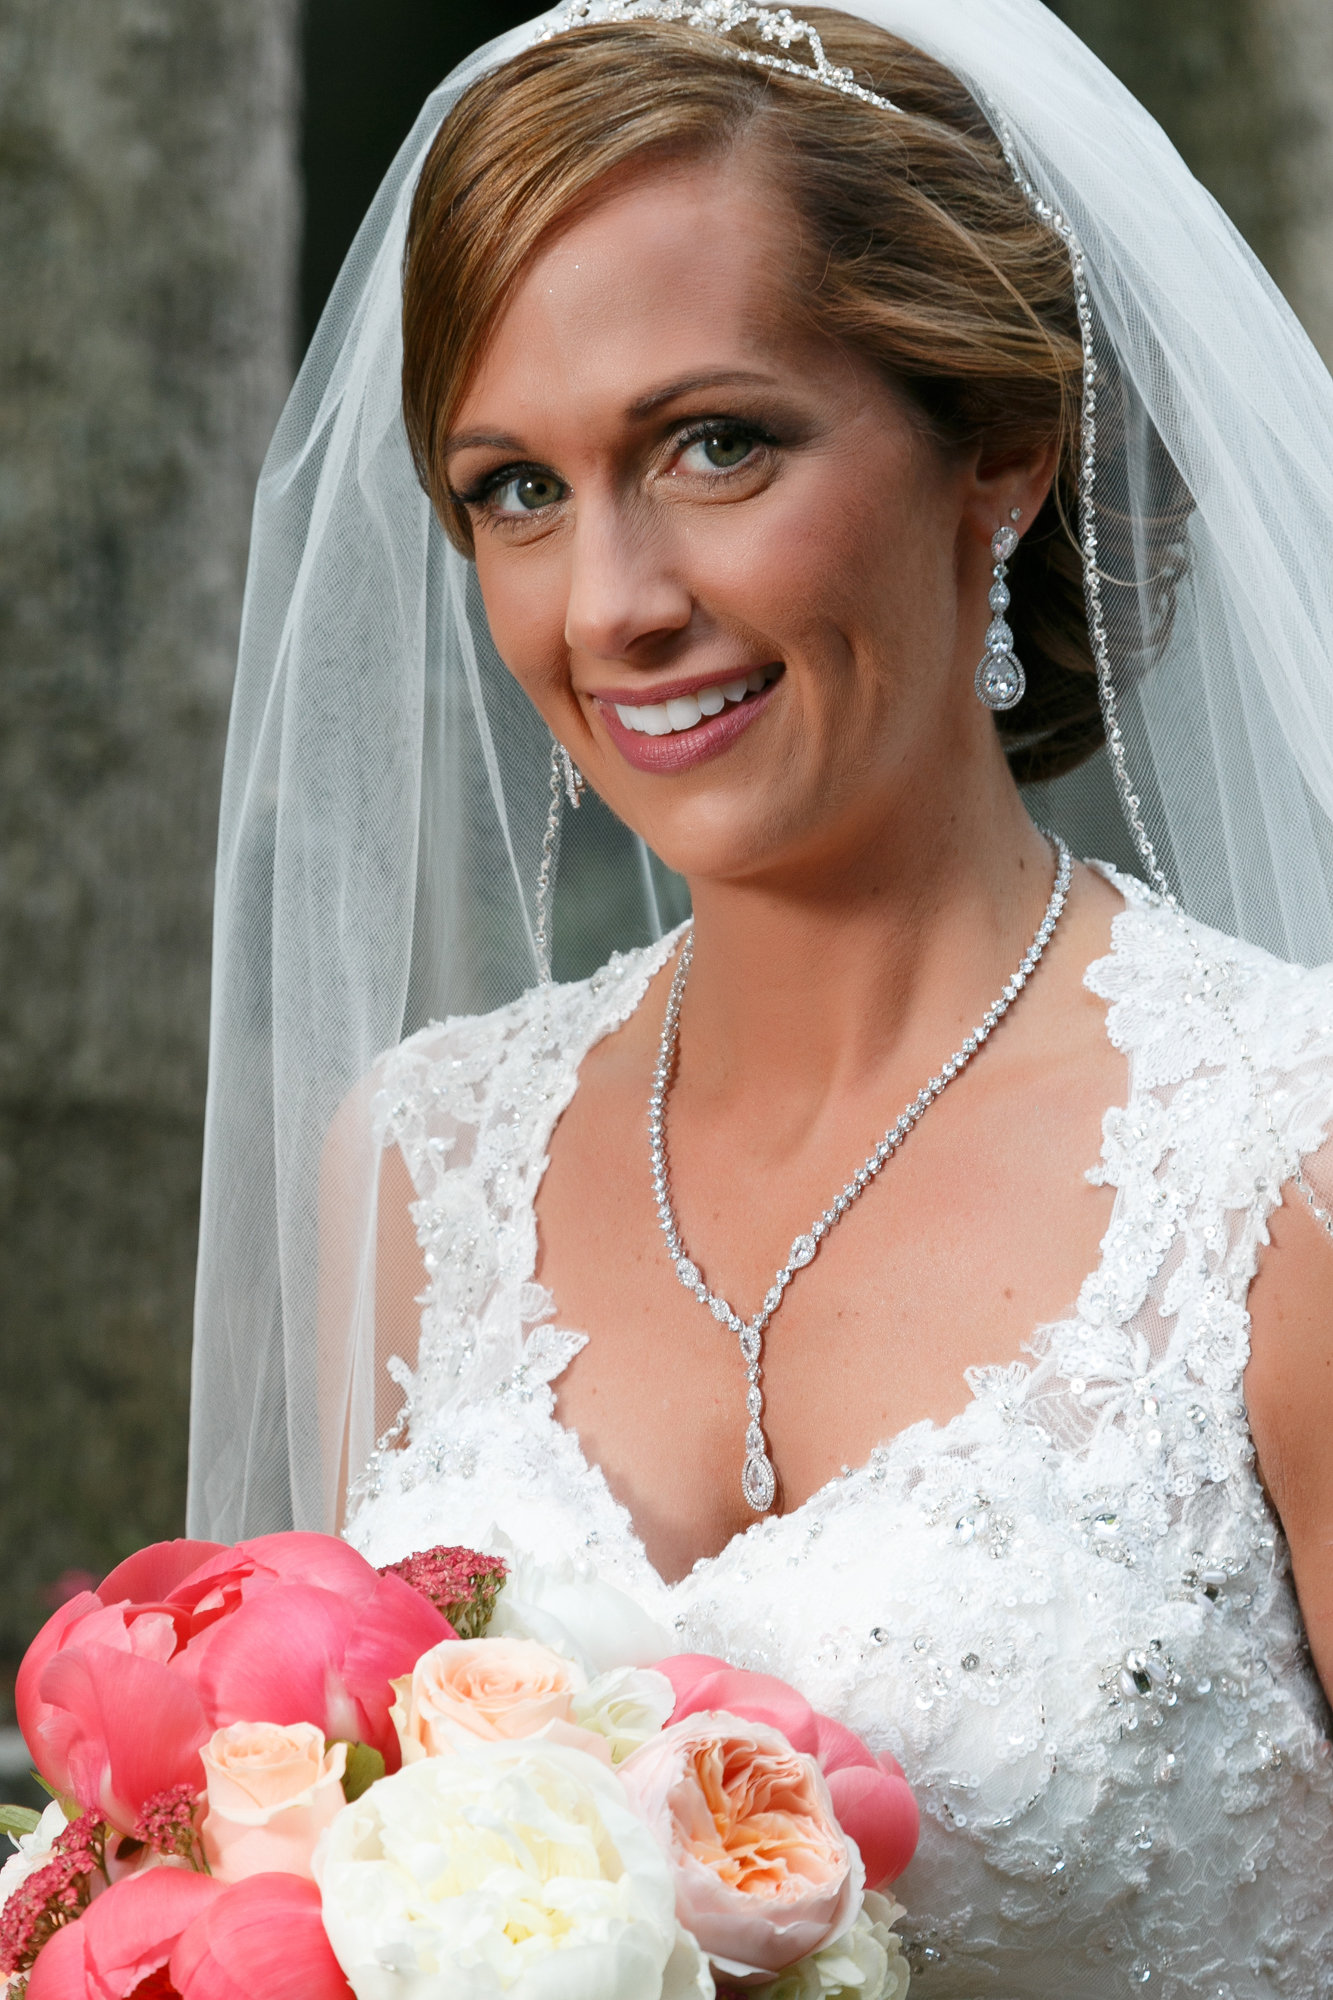 Melissa smiles in wedding gown with bouquet